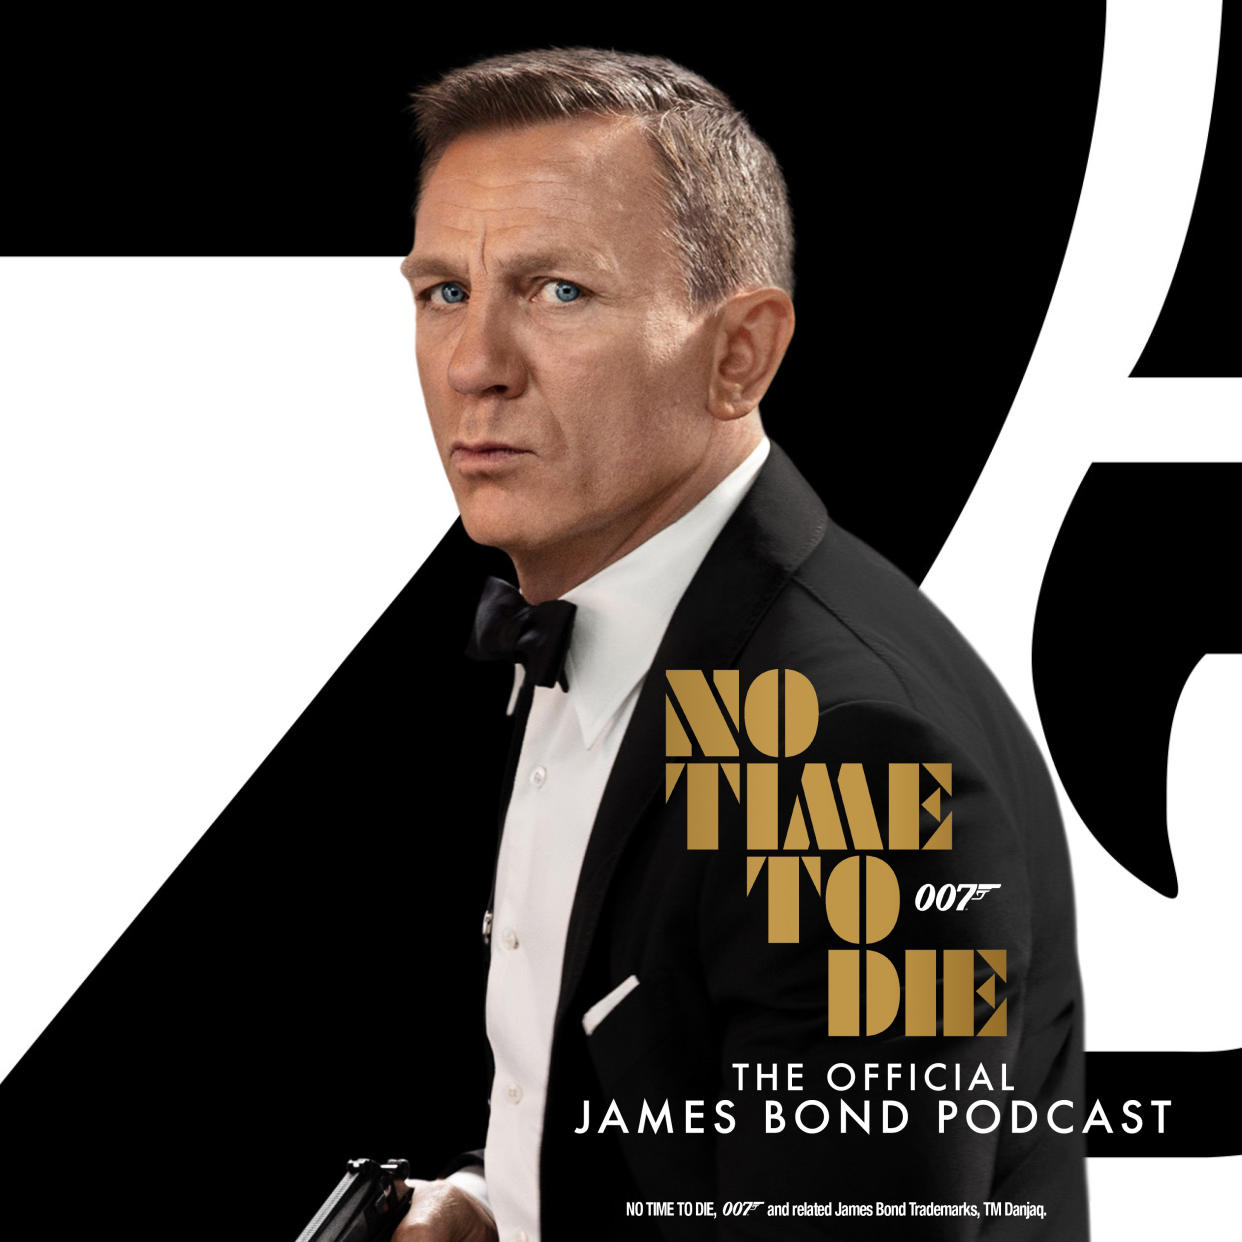 No Time To Die: The Official James Bond Podcast is produced by Somethin’ Else in association with Metro Goldwyn Mayer (MGM), Universal Pictures International, United Artists Releasing and EON Productions.